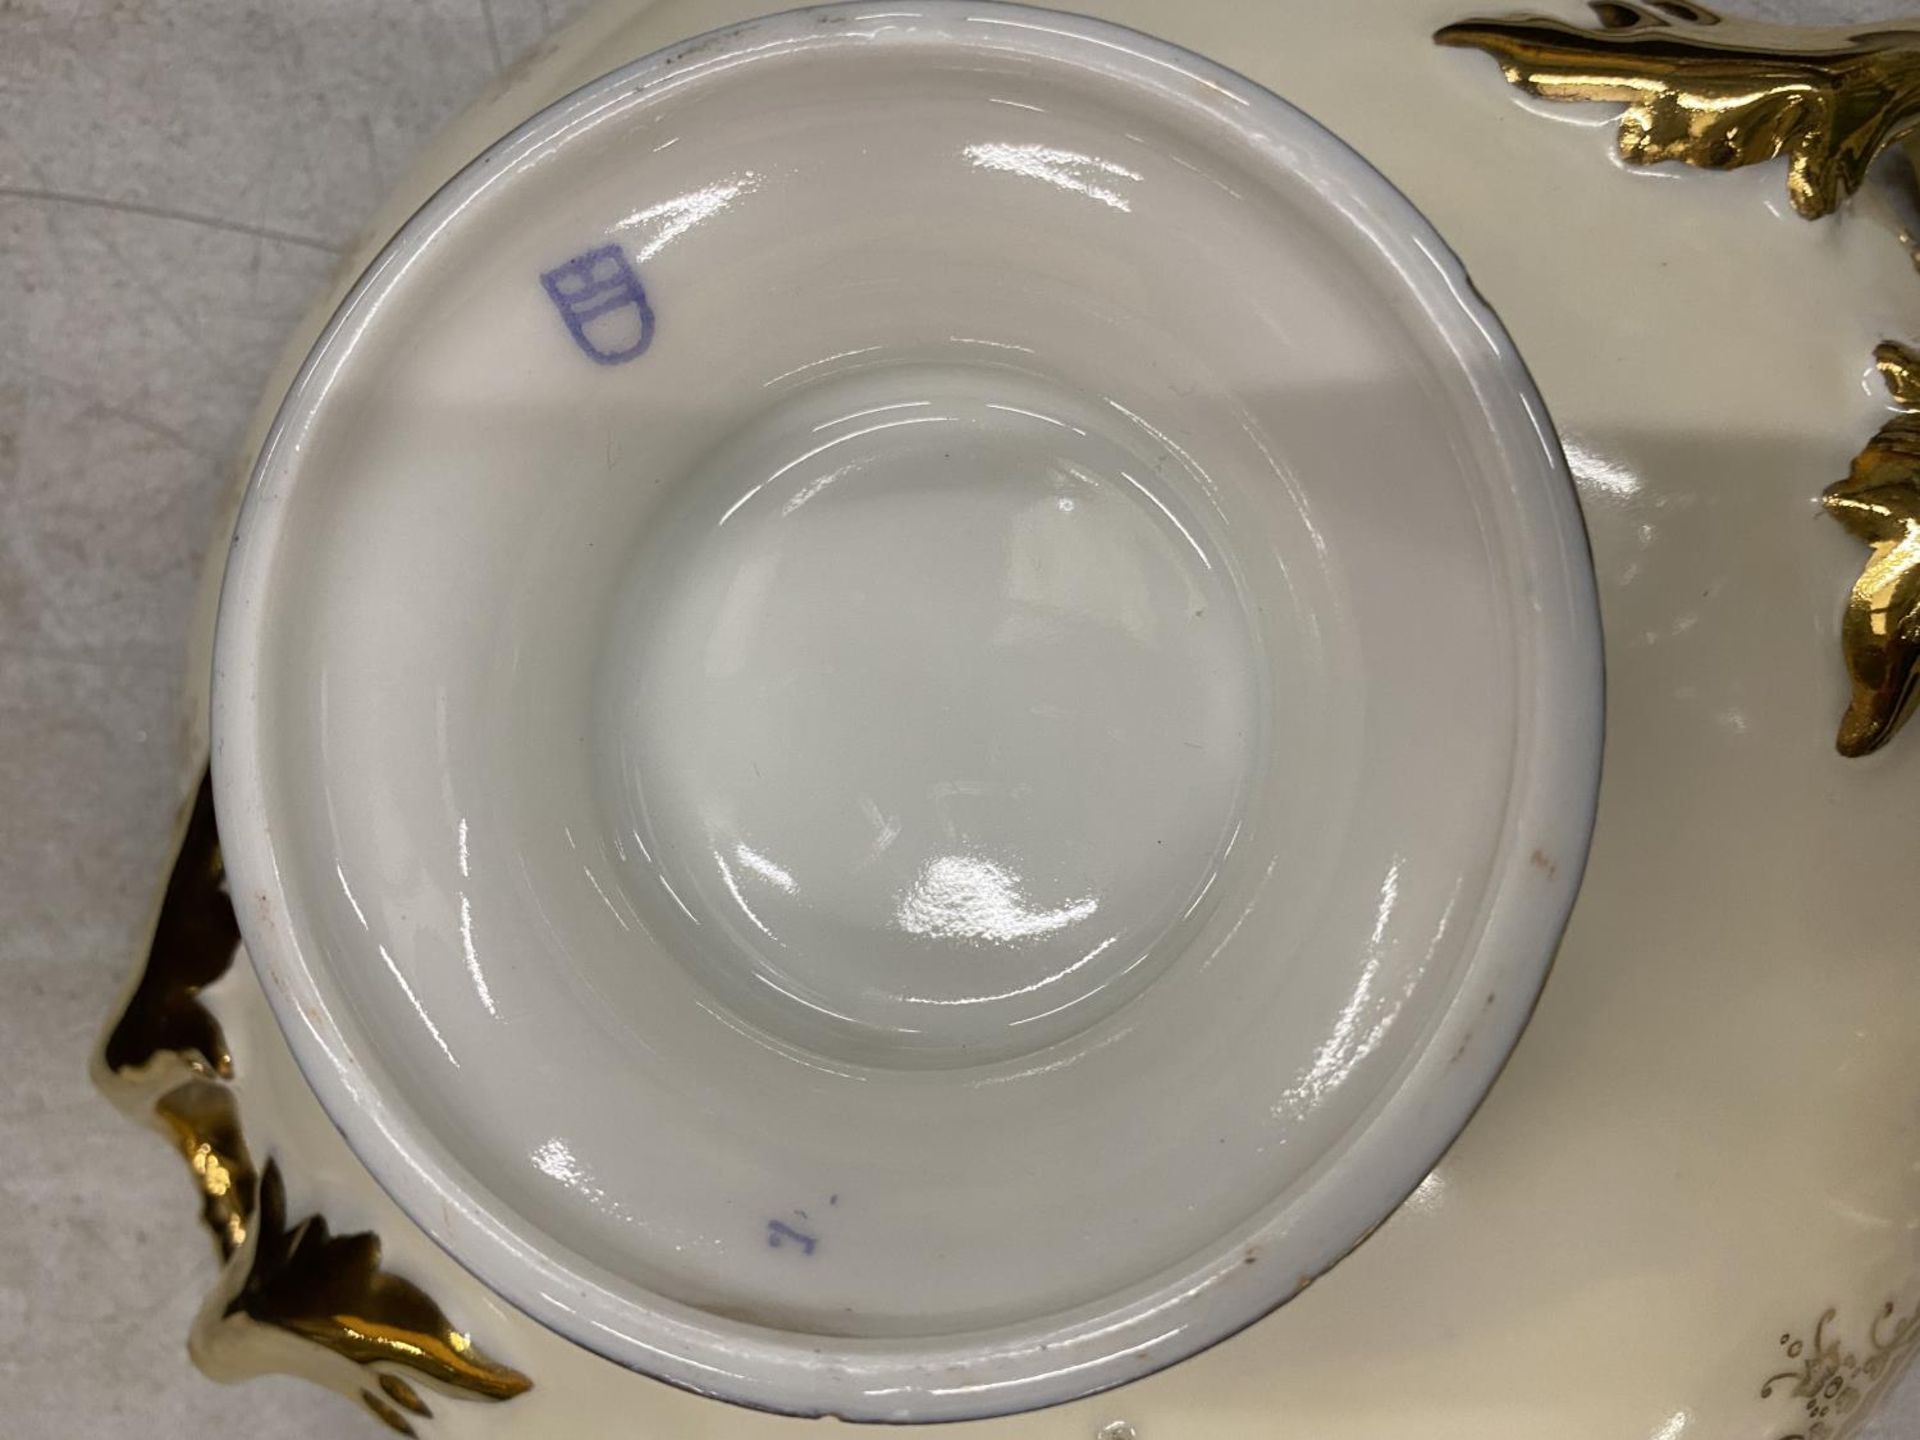 A VINTAGE CHINA TEASET WITH BLUE CROSSED SWORD MARK TO THE BASE (POSSIBLY MEISSEN) TO INCLUDE A - Image 3 of 8